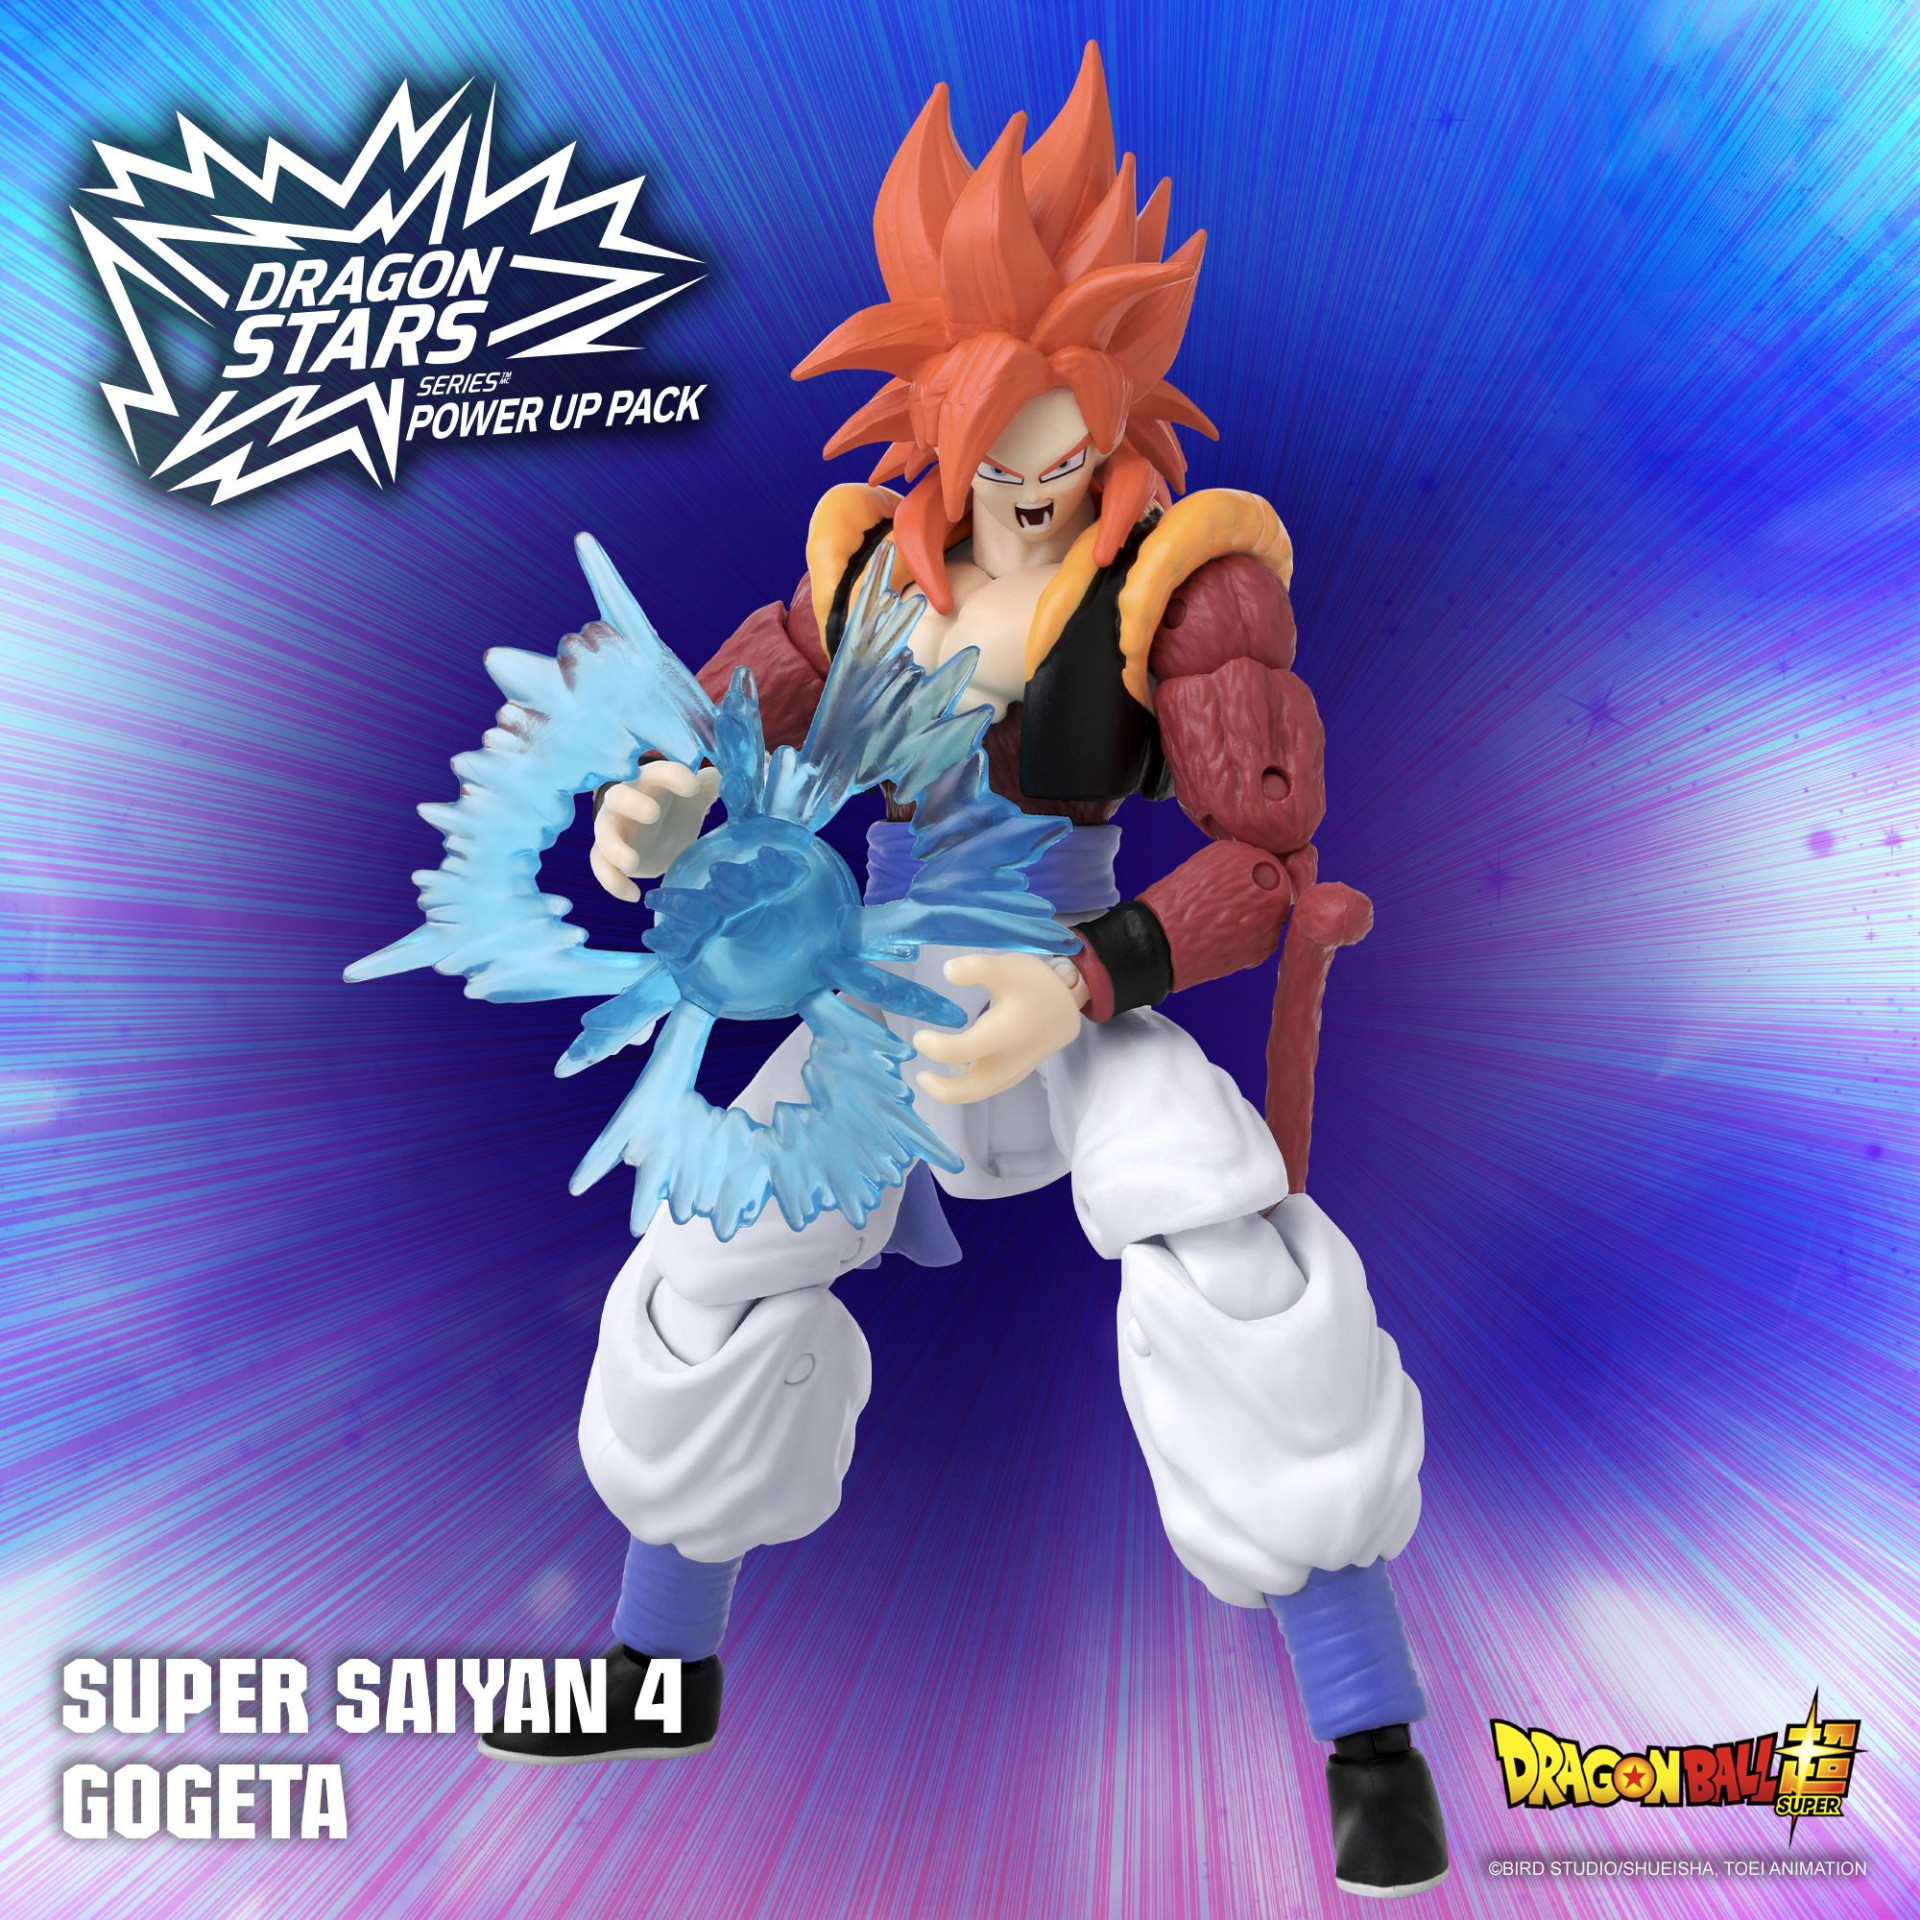 Super Saiyan 4 Gogeta is now available in Dragon Stars Series Power Up Pack!